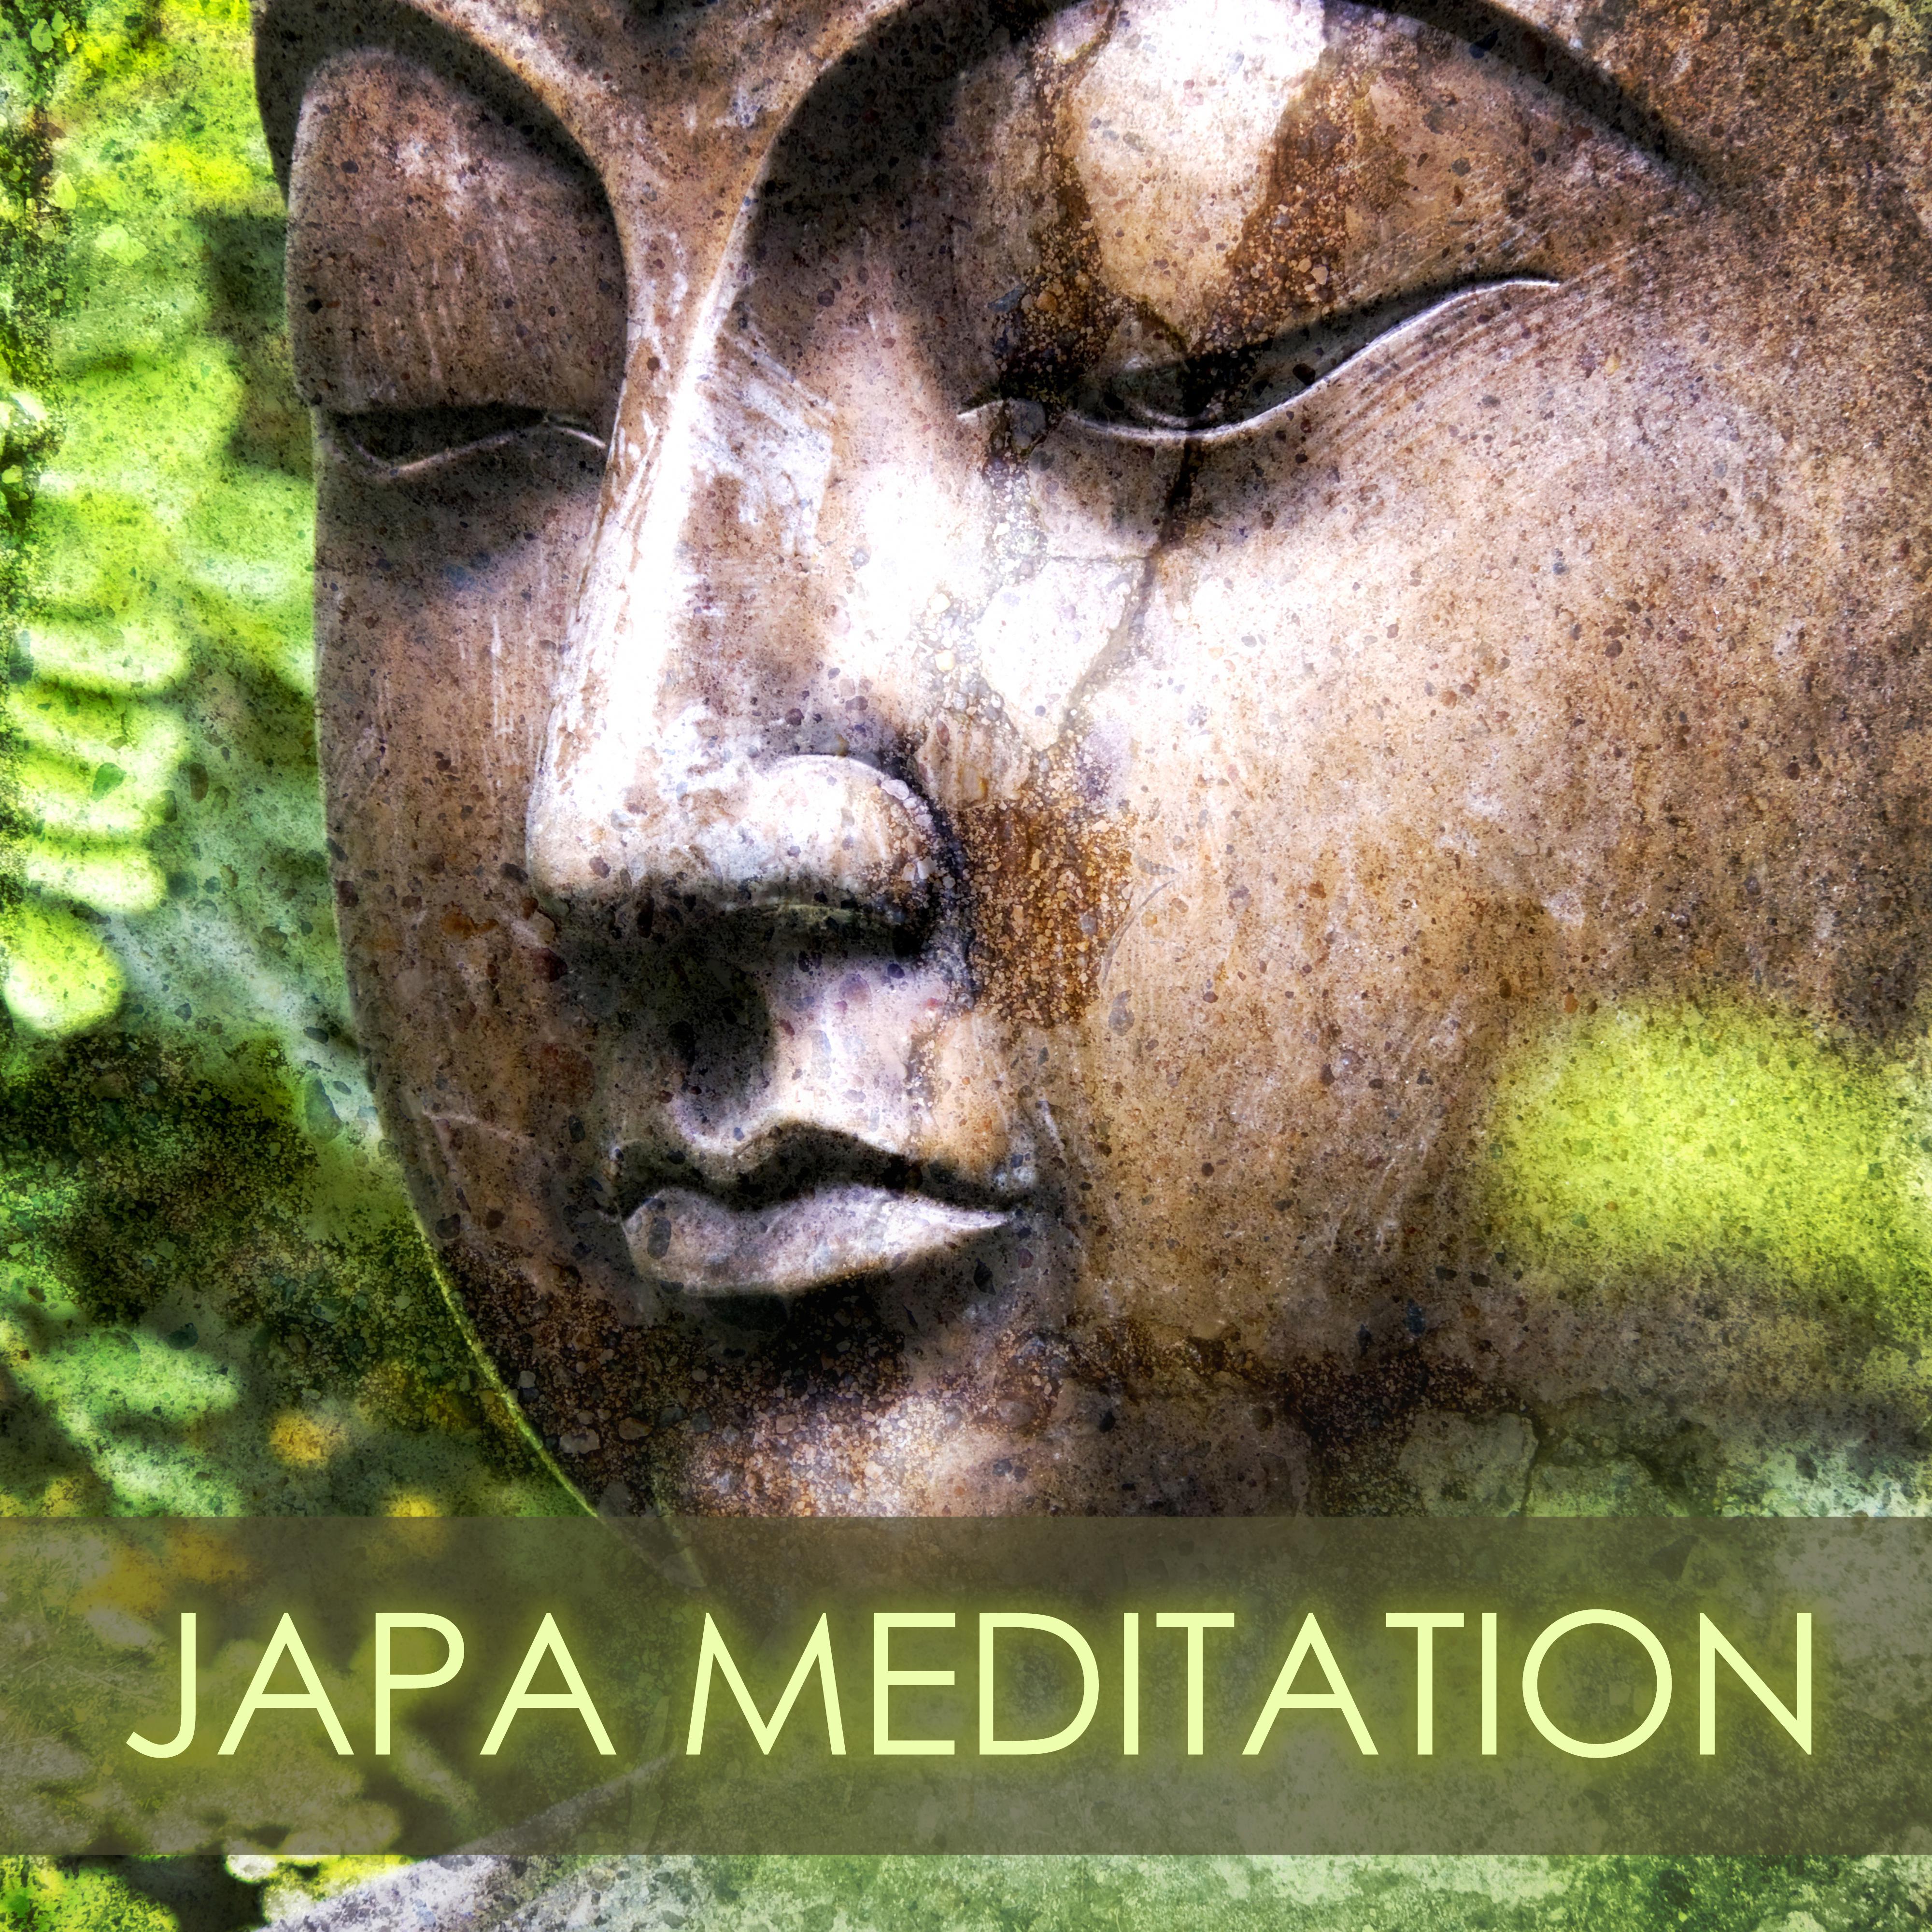 Japa Meditation - Relaxing Music for Clear Mind Mantra Meditations, Asian Meditating Songs for Mindfulness